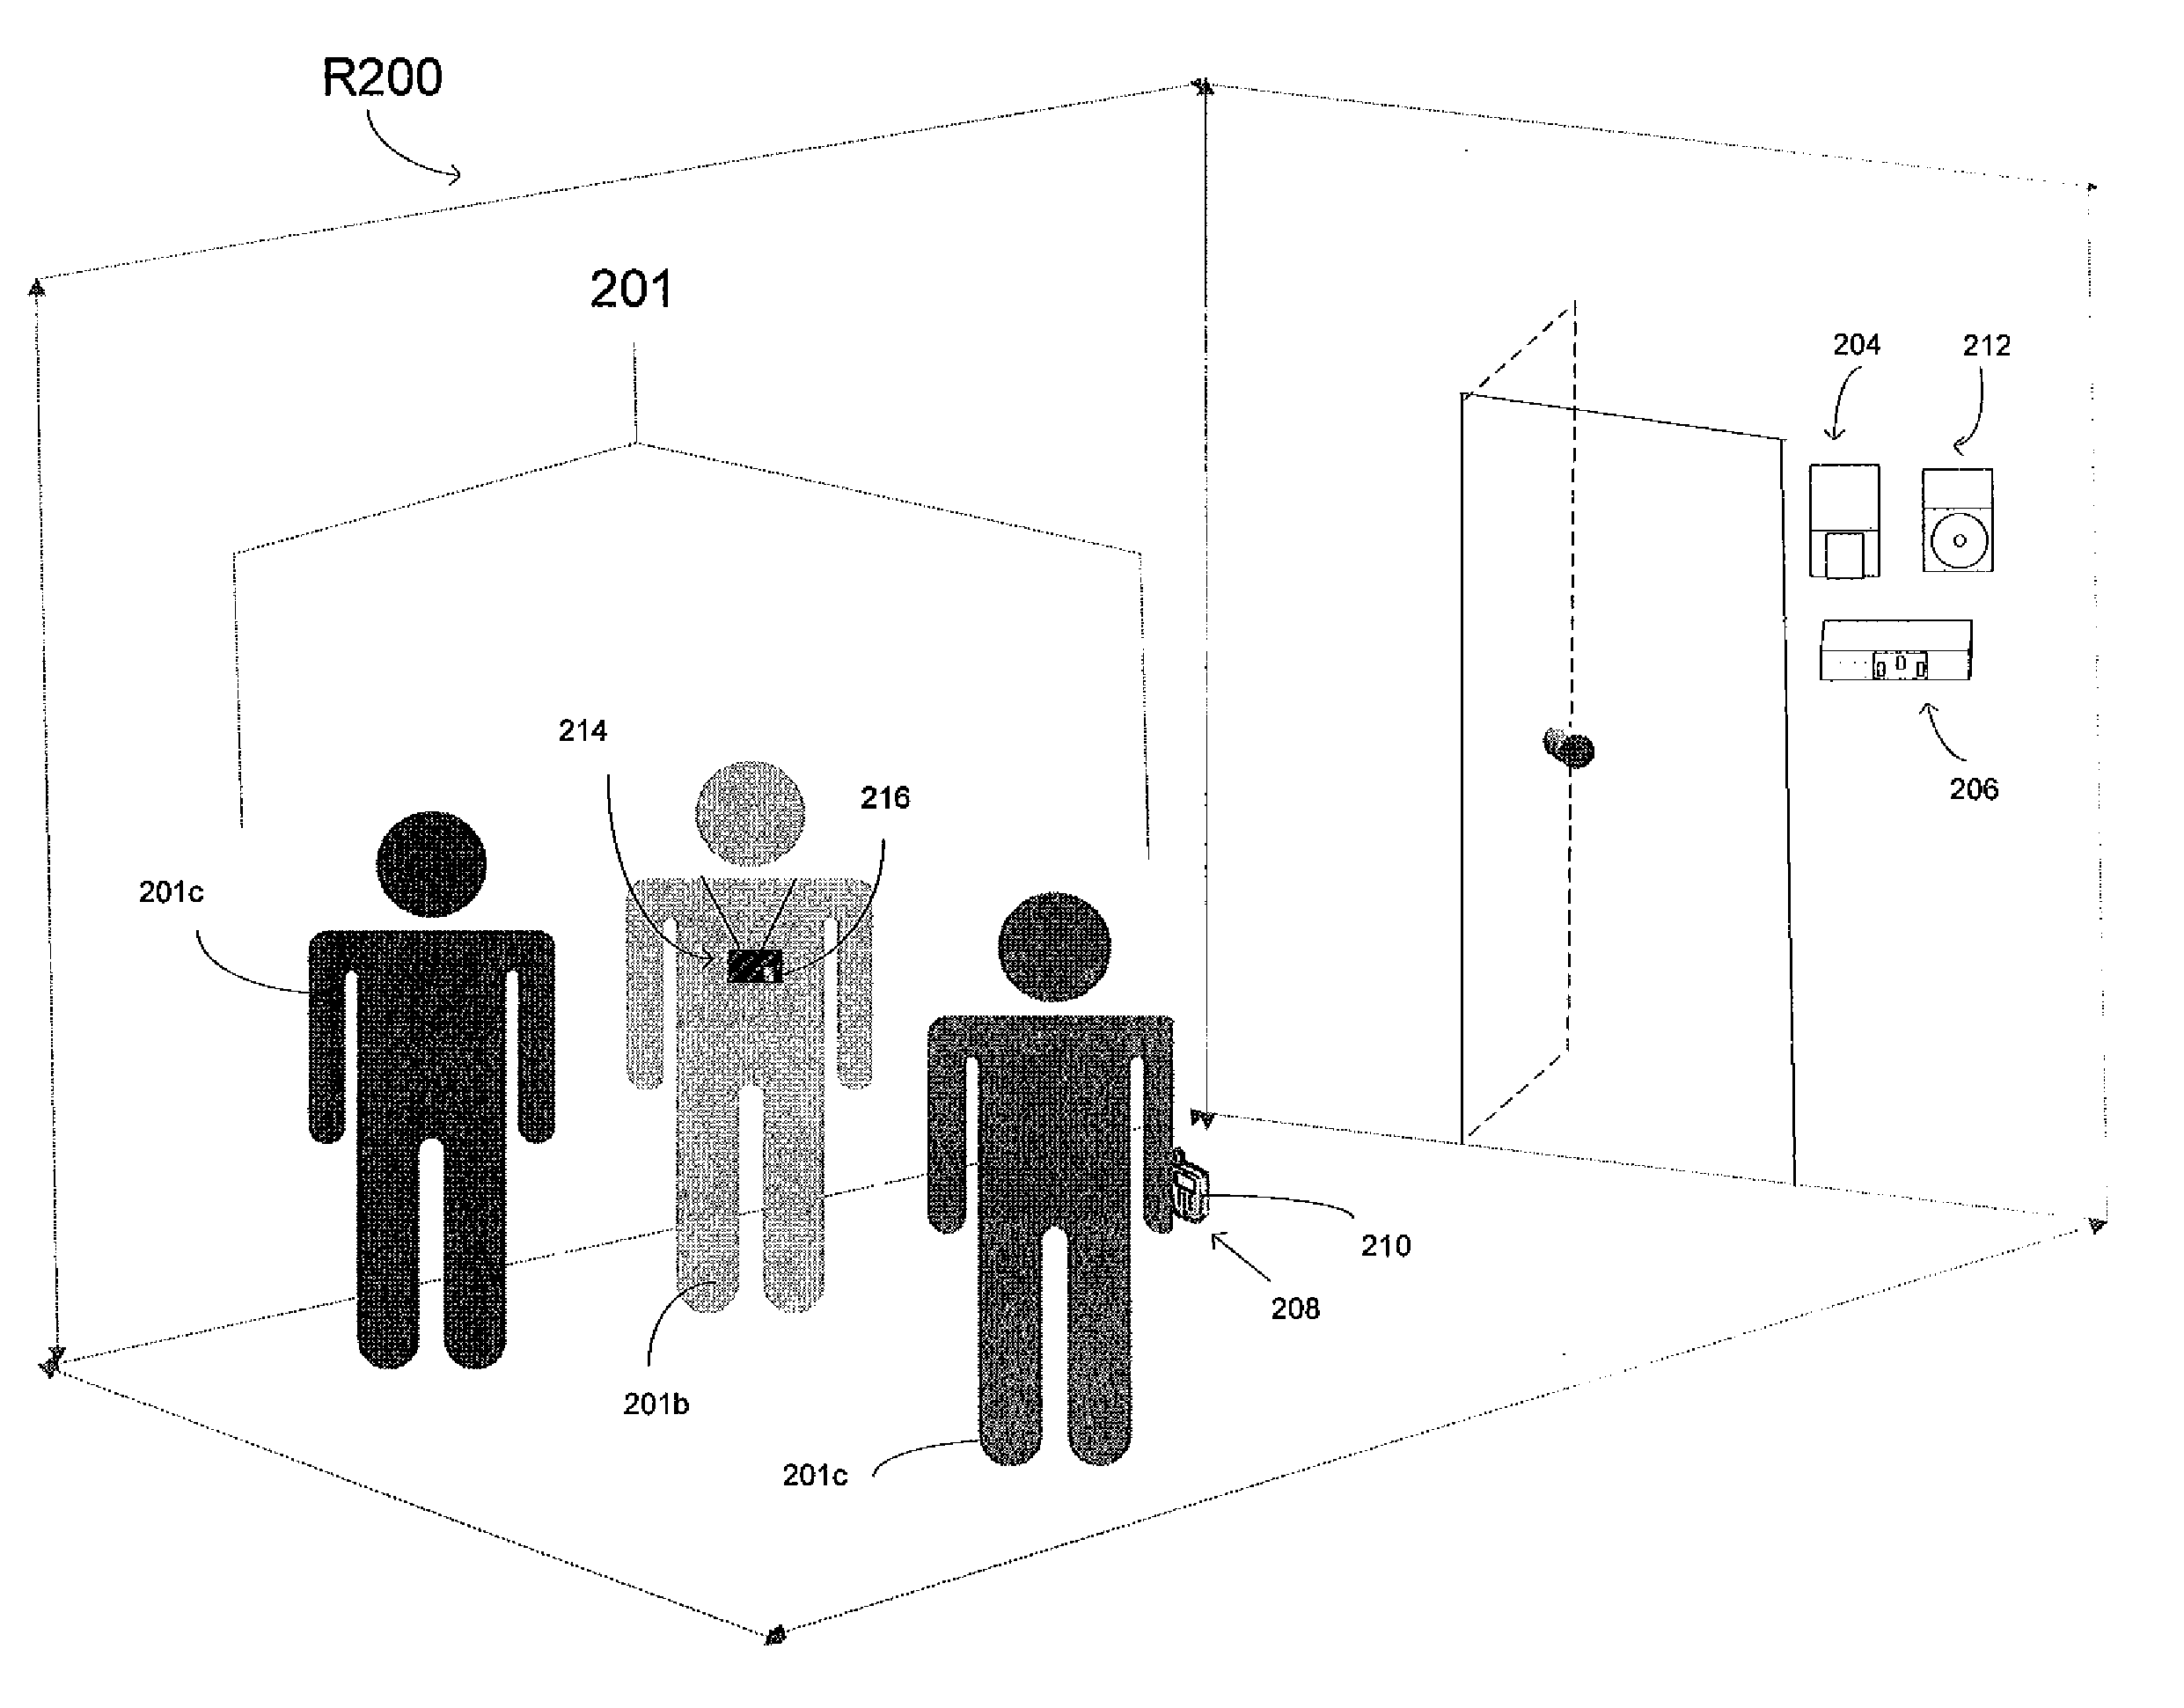 System for providing the status of a conference room and method of use